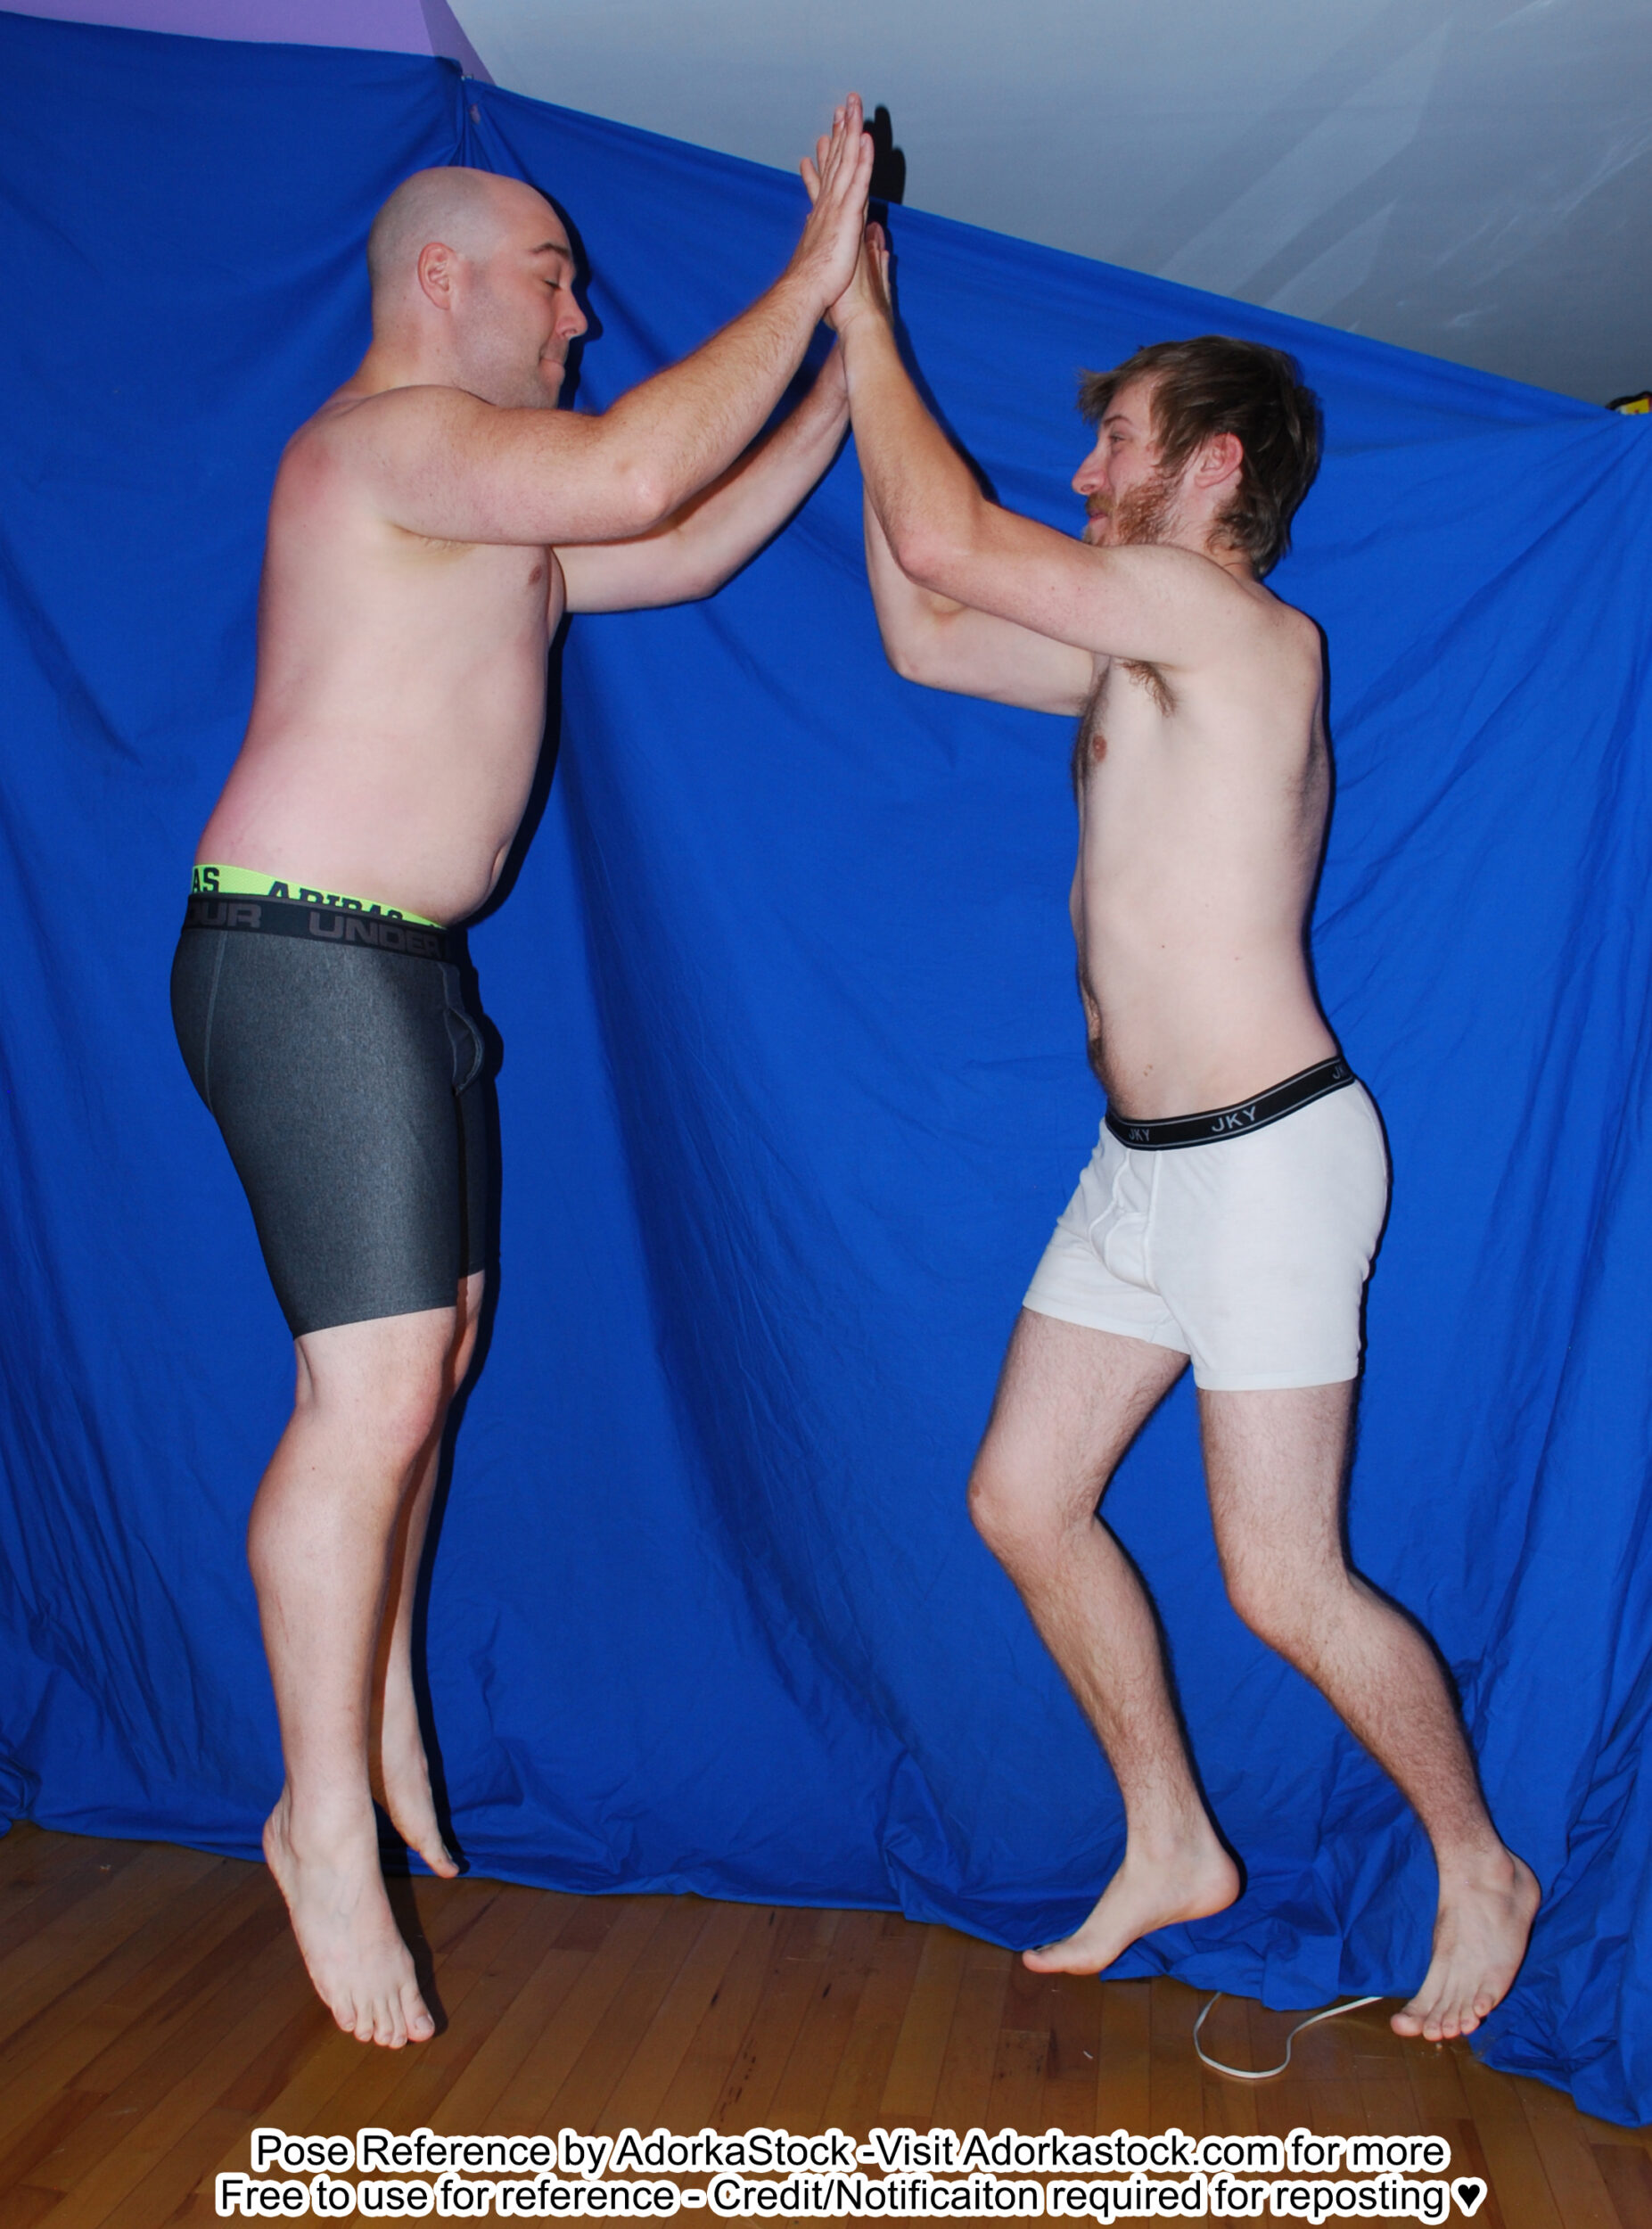 two, white, male pose reference models in a jumping double high five